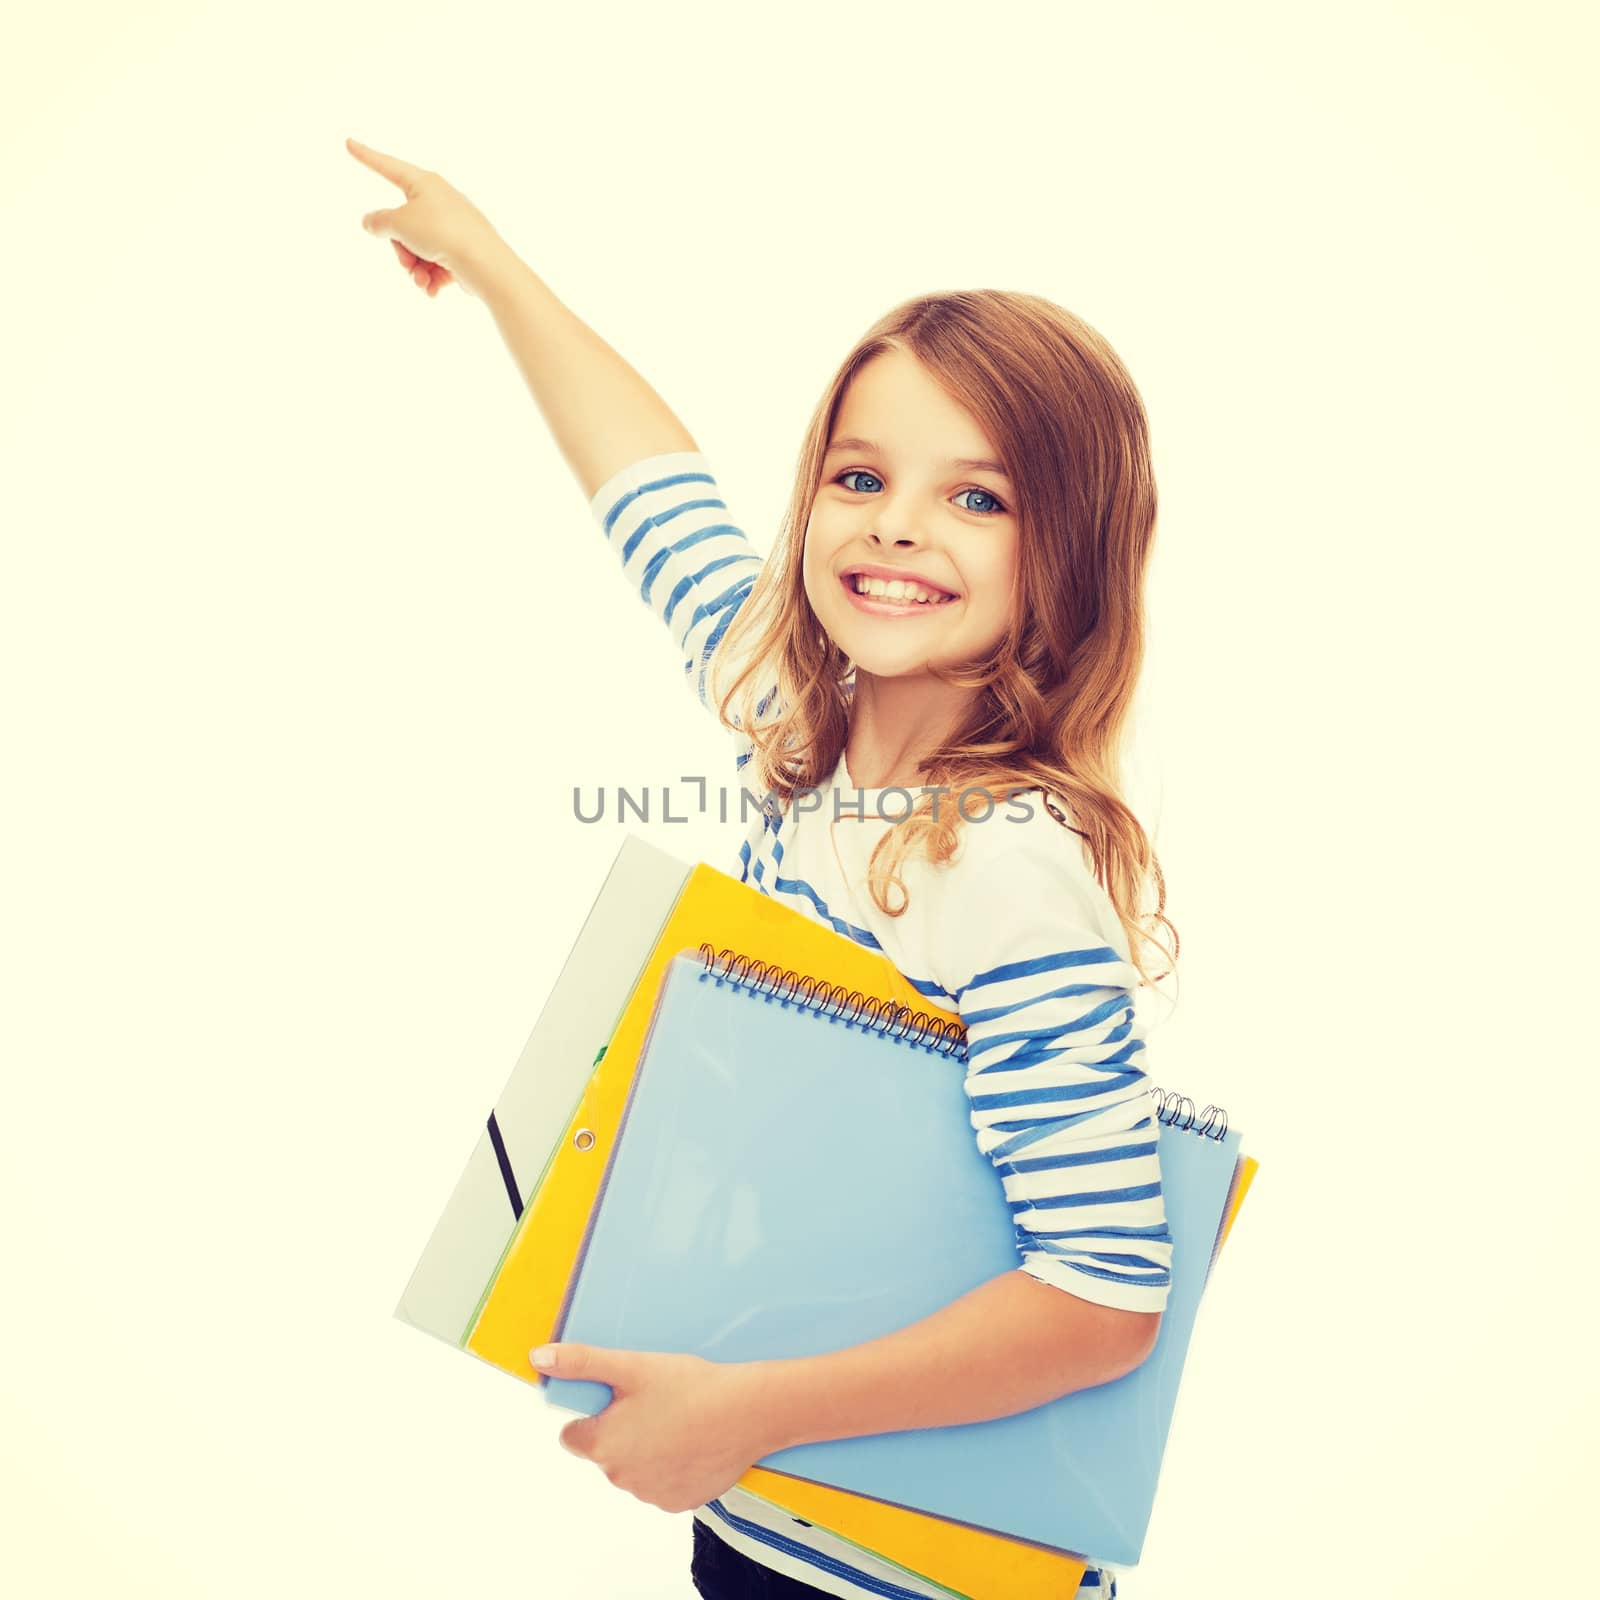 education, school and virtual screen concept - cute little girl with colorful folders pointing in the air or virtual screen